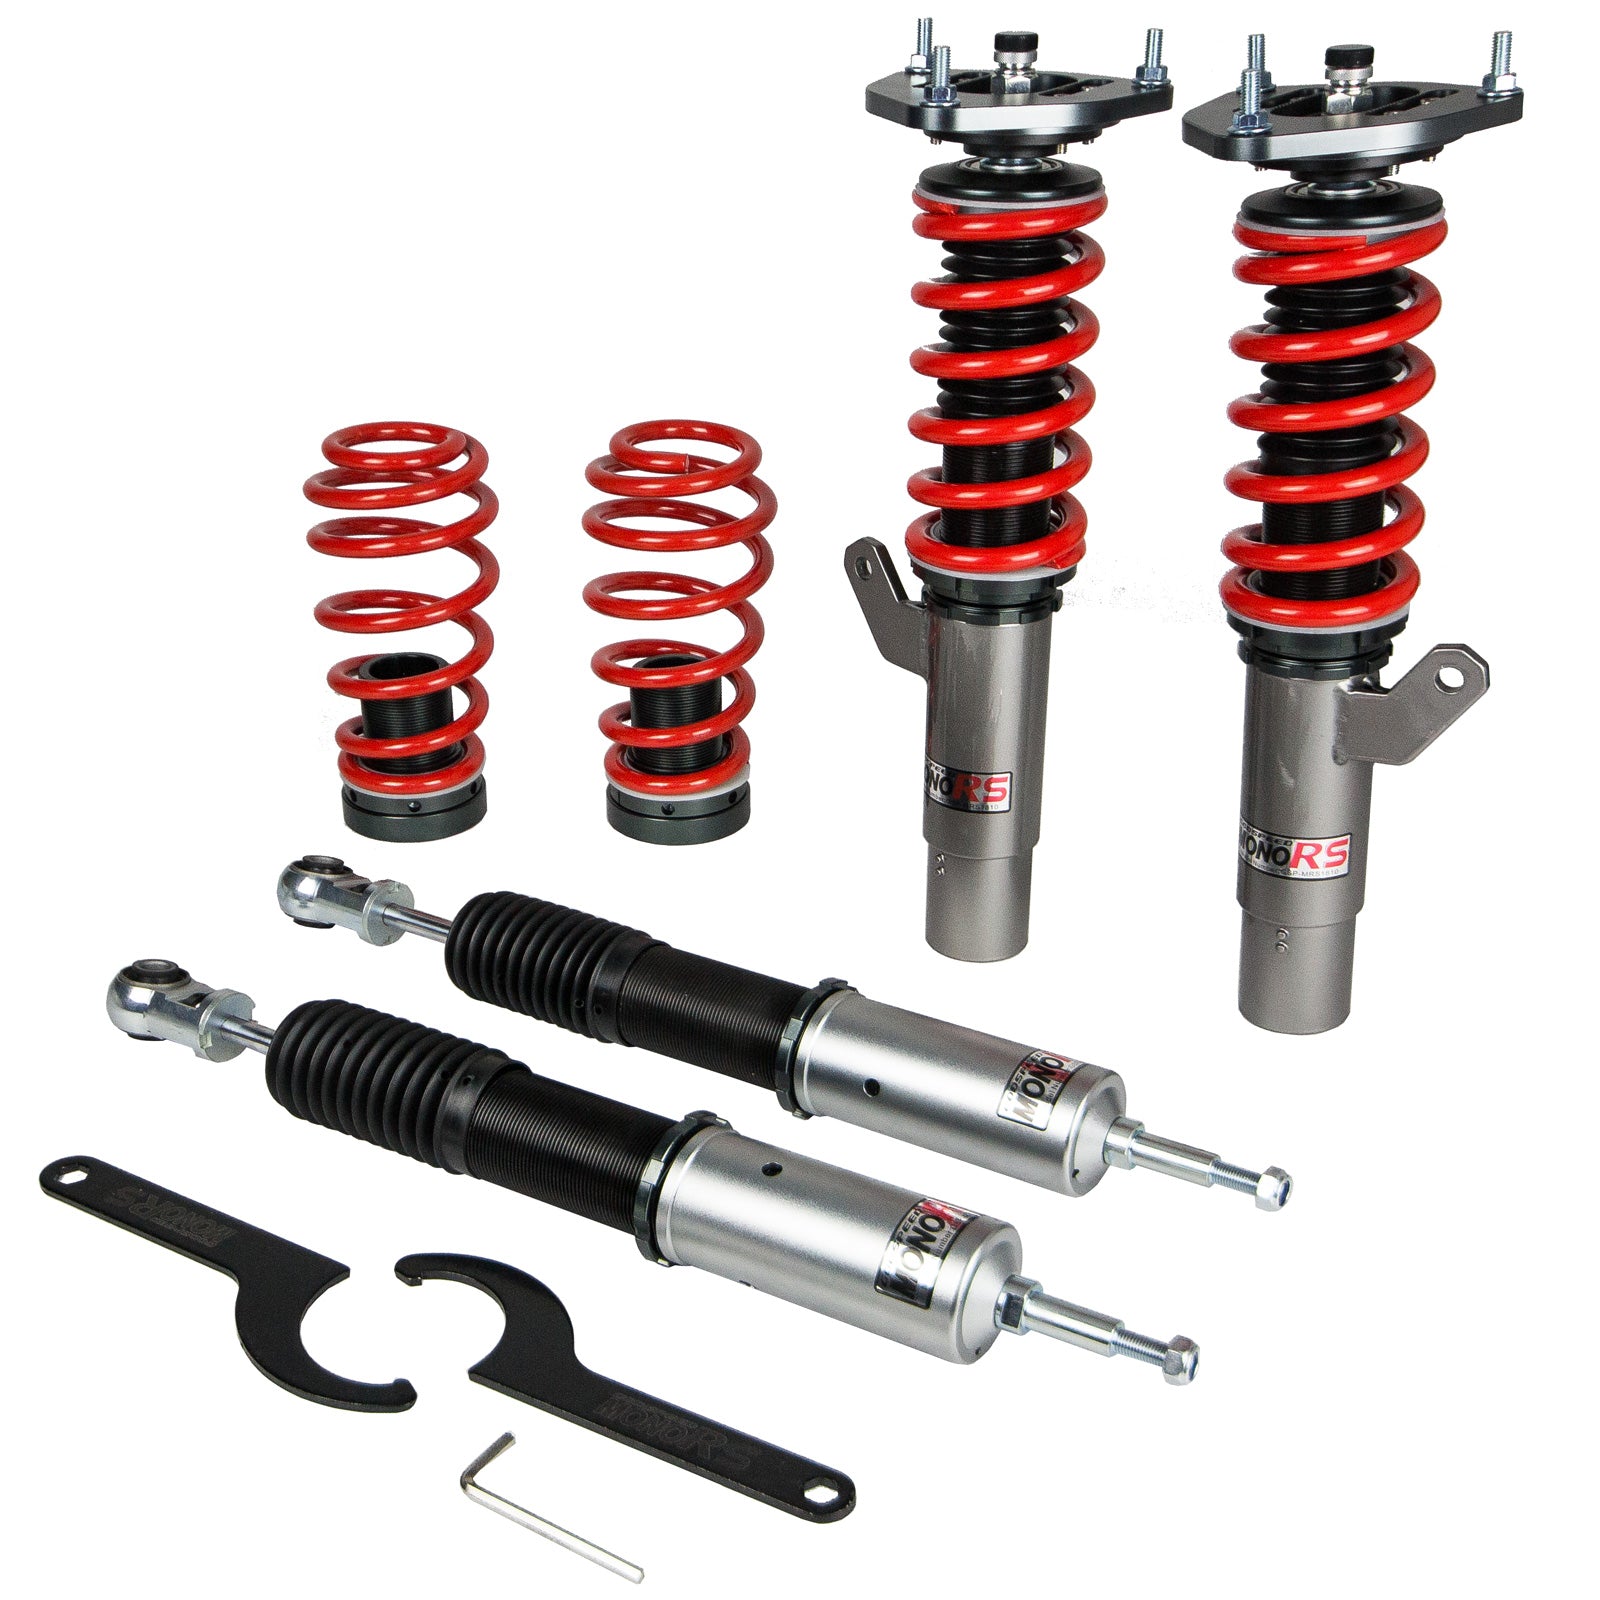 Godspeed MRS1810-B MonoRS Coilover Lowering Kit, 32 Damping Adjustment, Ride Height Adjustable